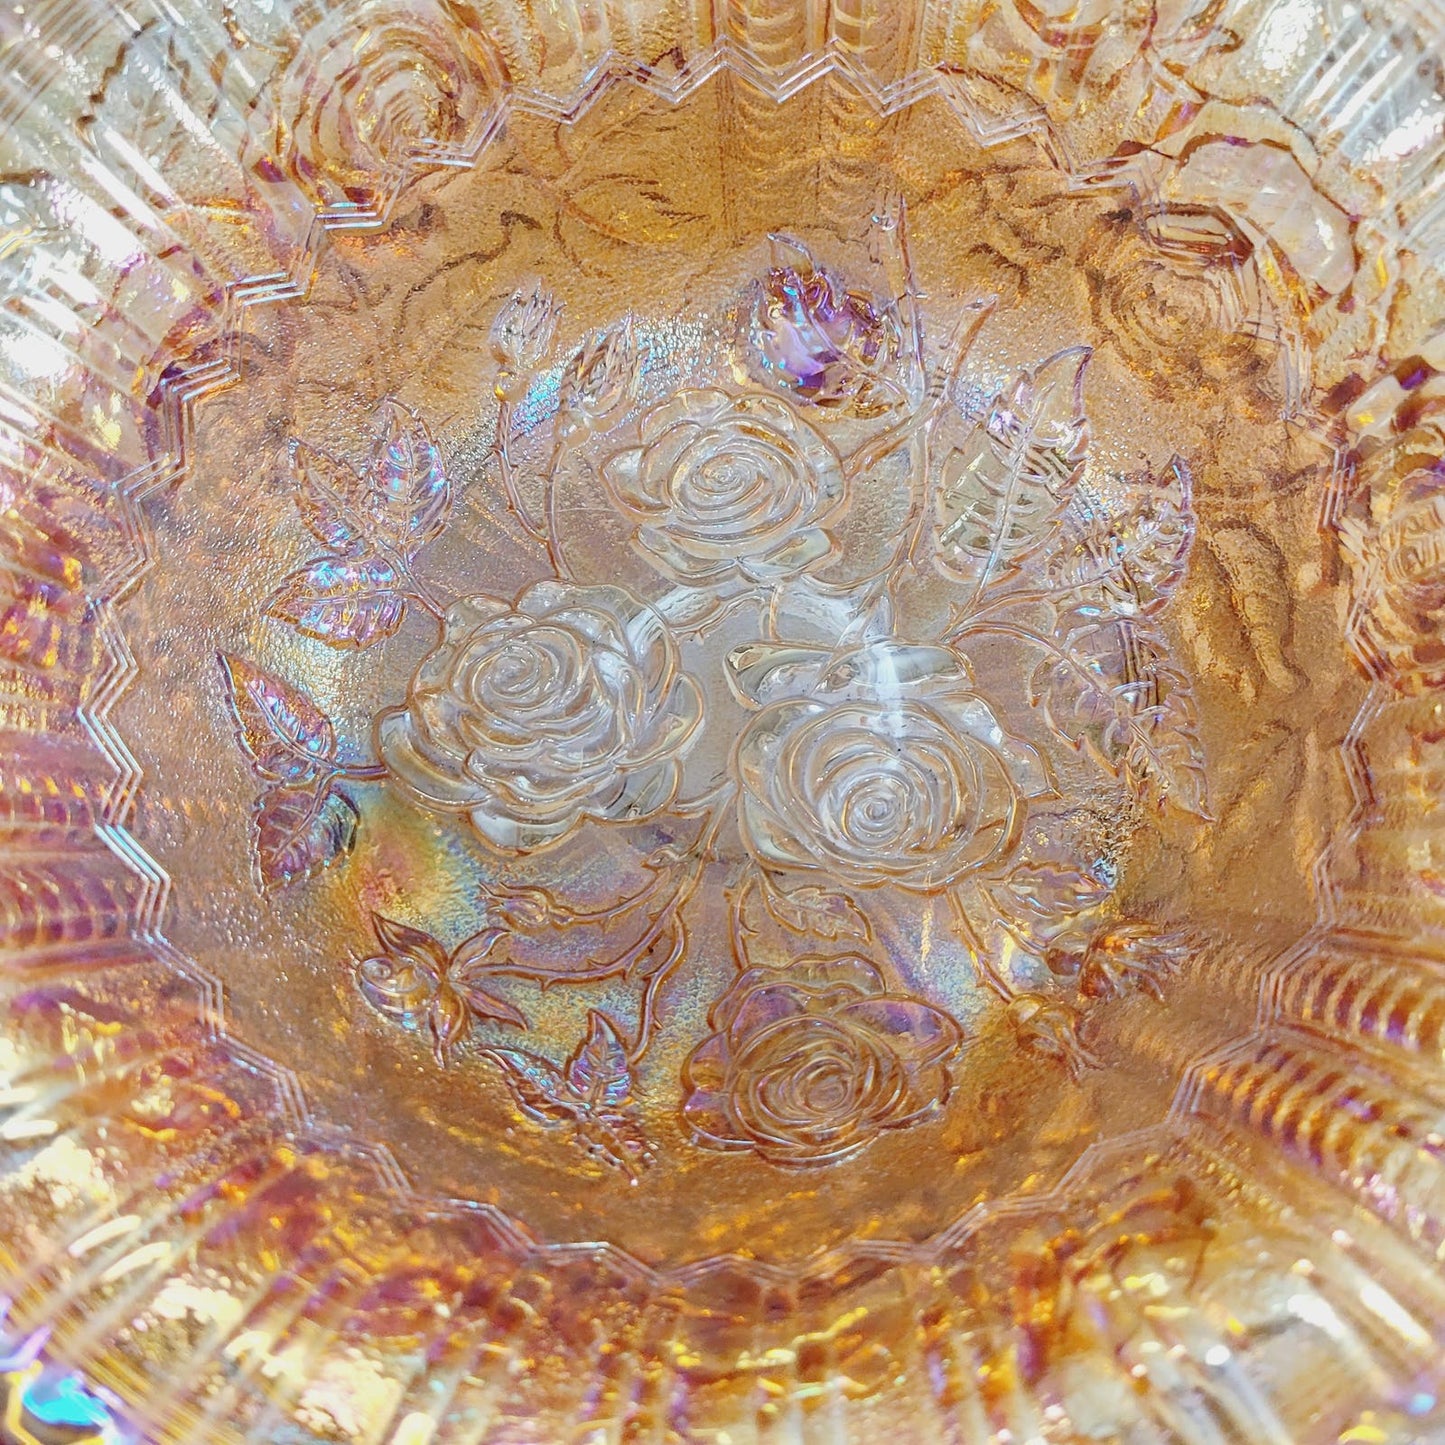 Vintage 10” Rose Carnival Glass Fruit Bowl Marigold Floral Detail with Ball Feet